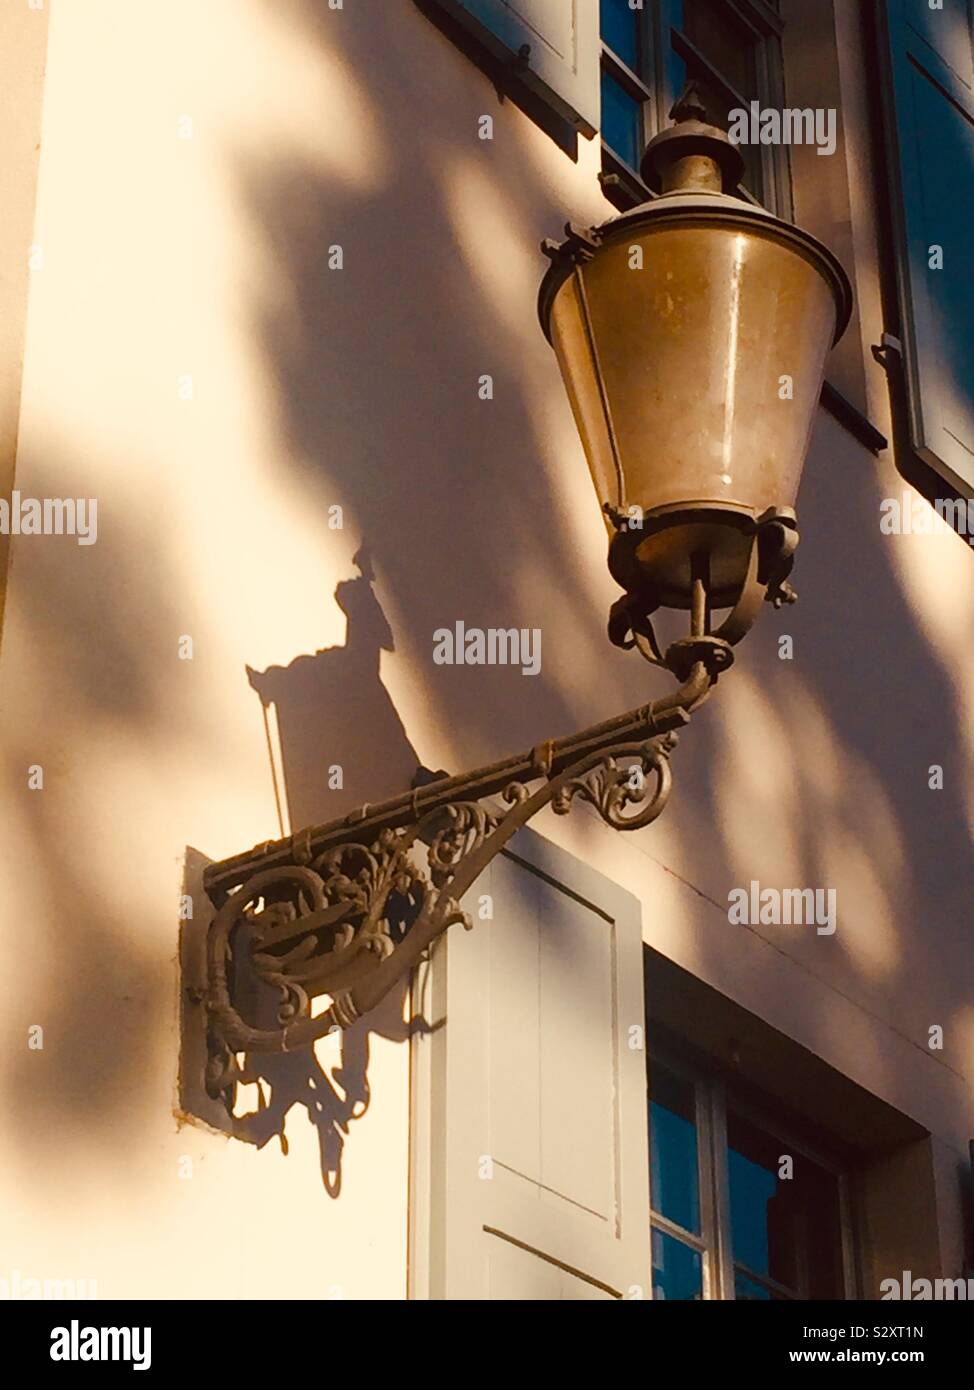 Street lantern attached to white wall in shades of brown Stock Photo